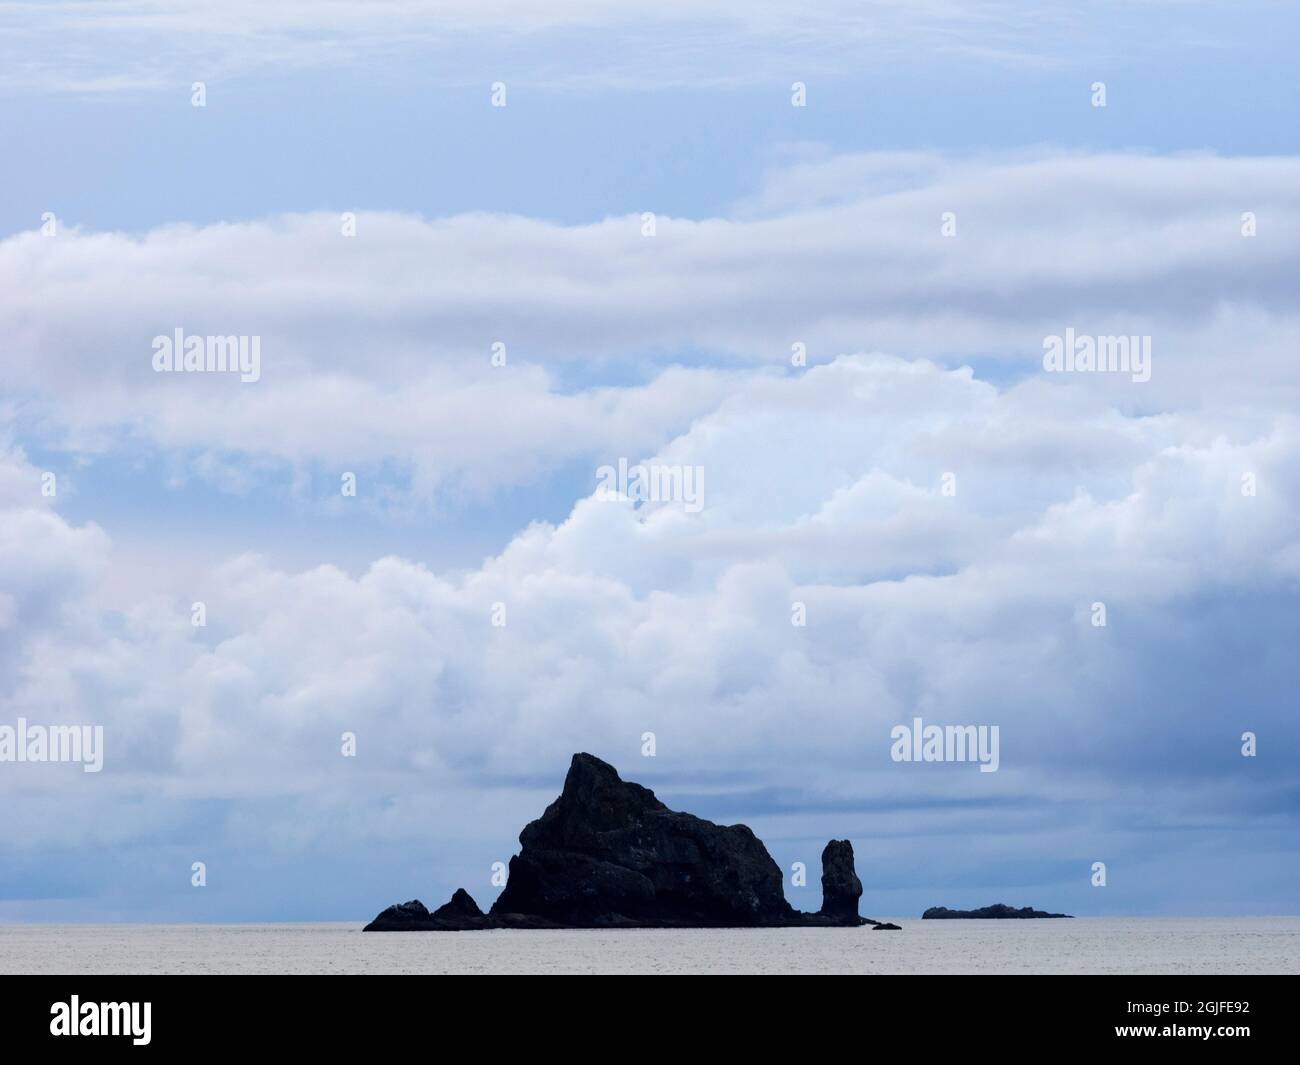 WA, Olympic National Park, Rialto Beach, Seastack and Clouds Stock Photo